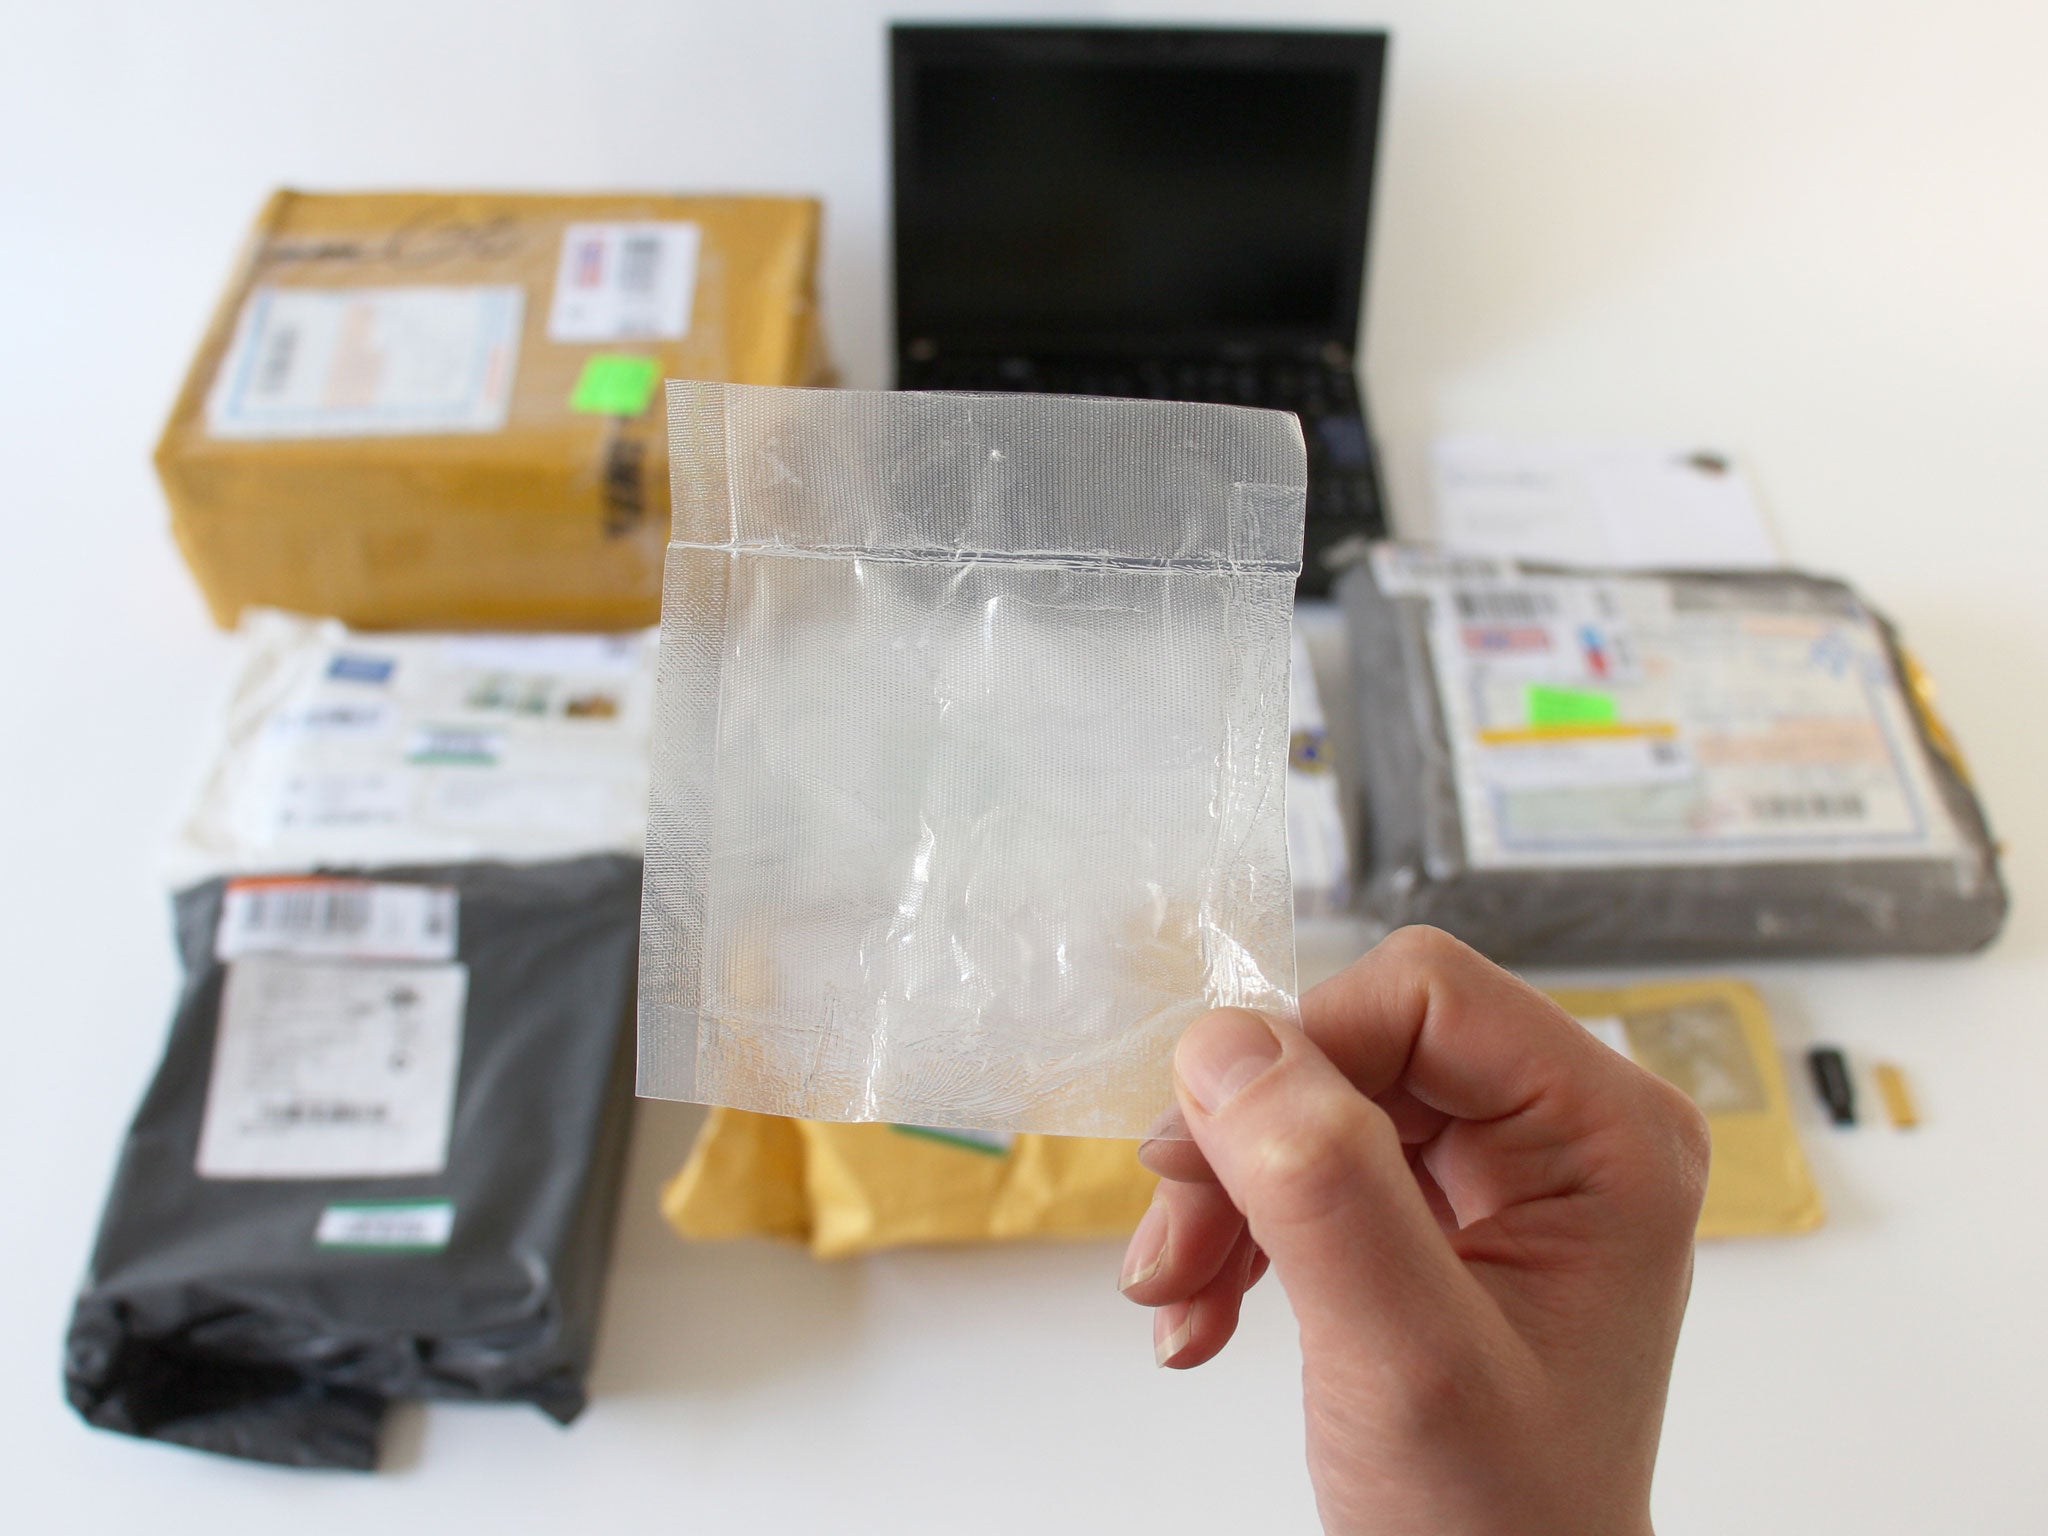 The Random Darknet Shopper ordered MDMA packet after being emptied by police